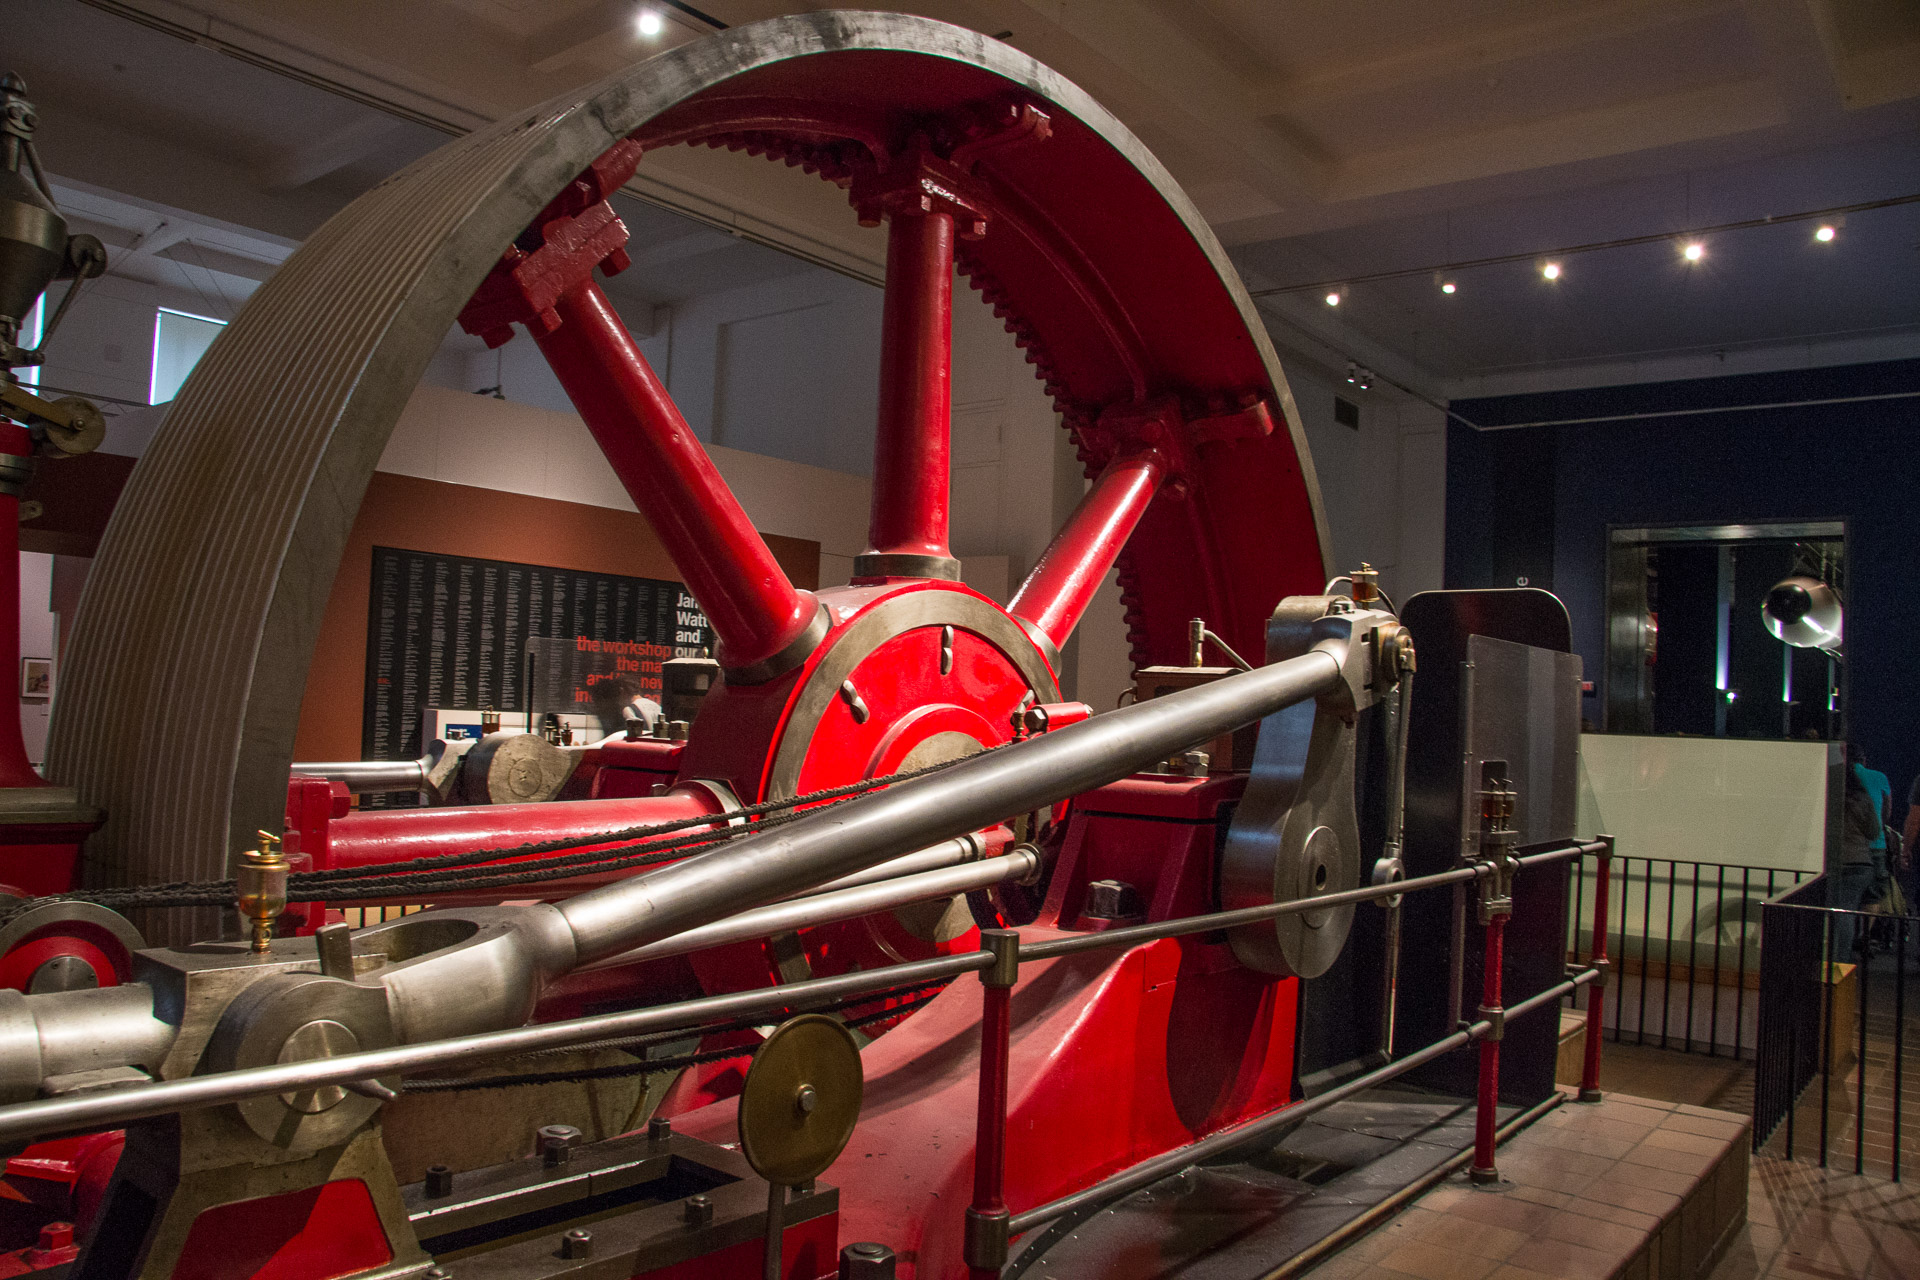 Mill engine at the Science Museum in London